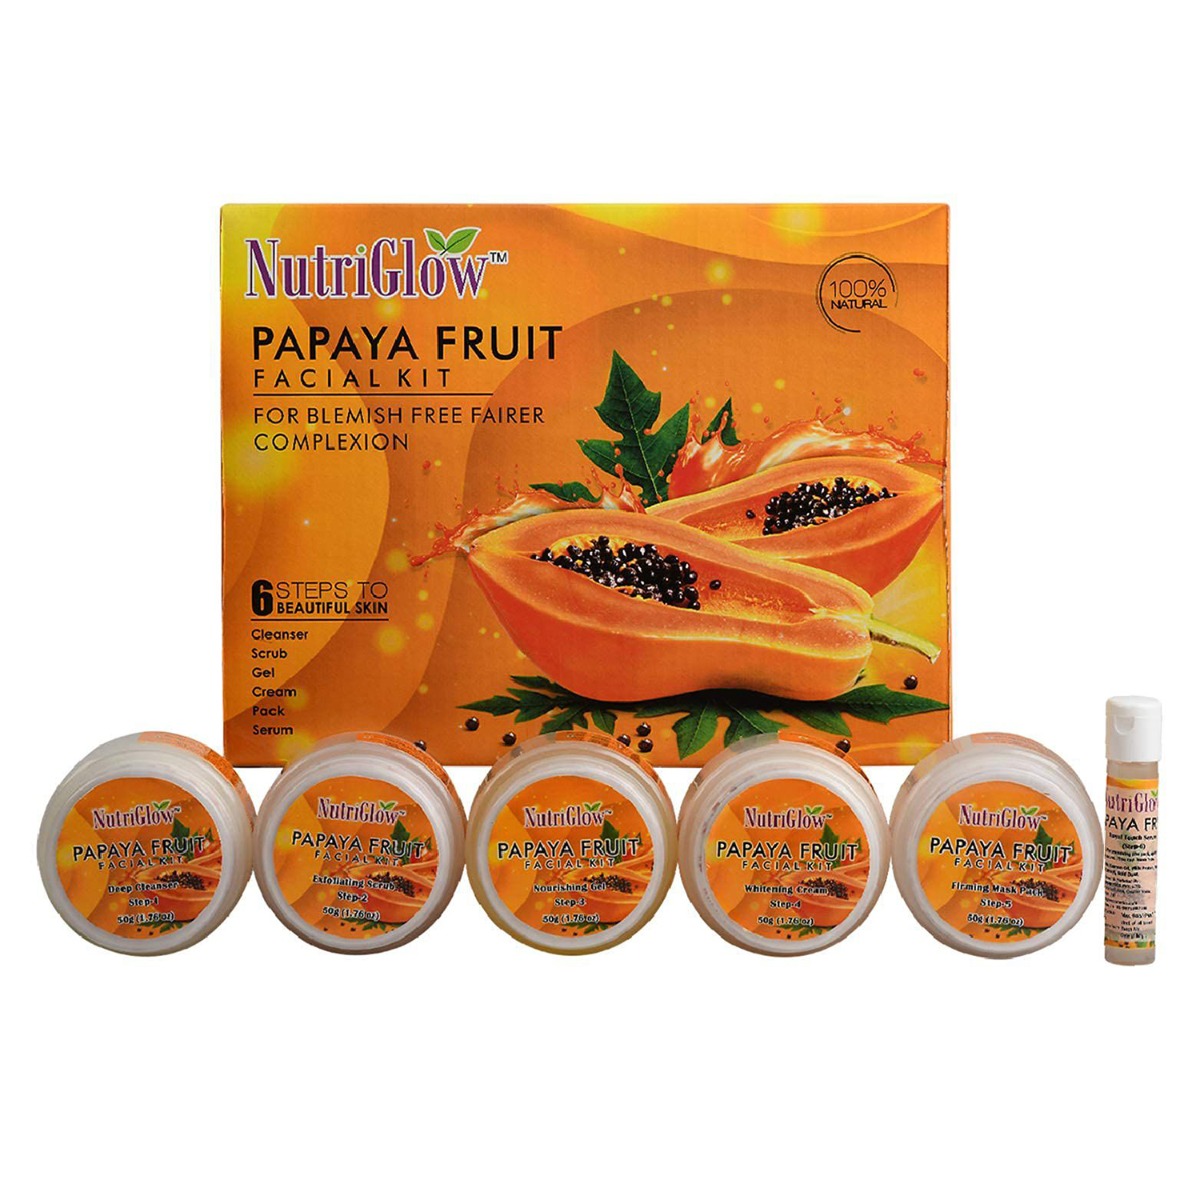 NutriGlow Papaya Facial Kit For Blemish Free, Glowing And Fairer Skin